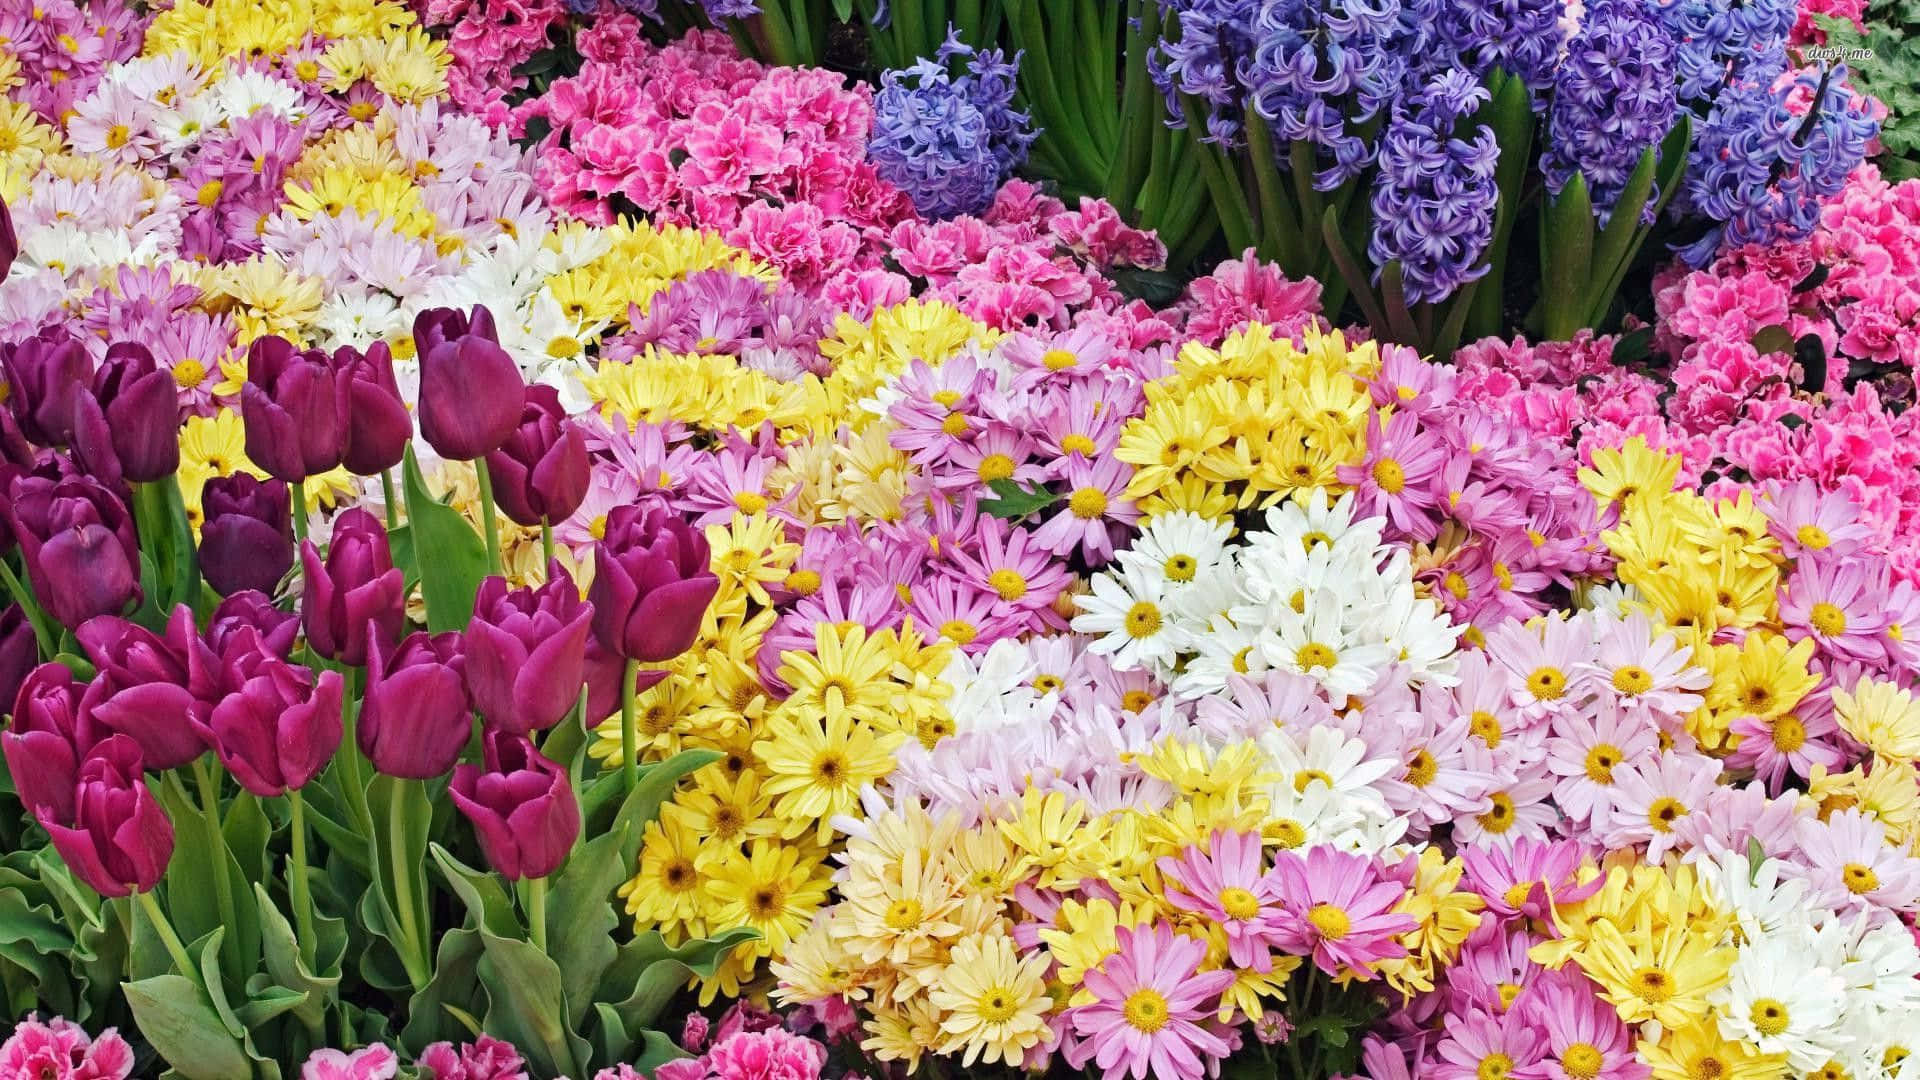 Spring Brings Colorful Flowers to Fill Your Desktop Wallpaper